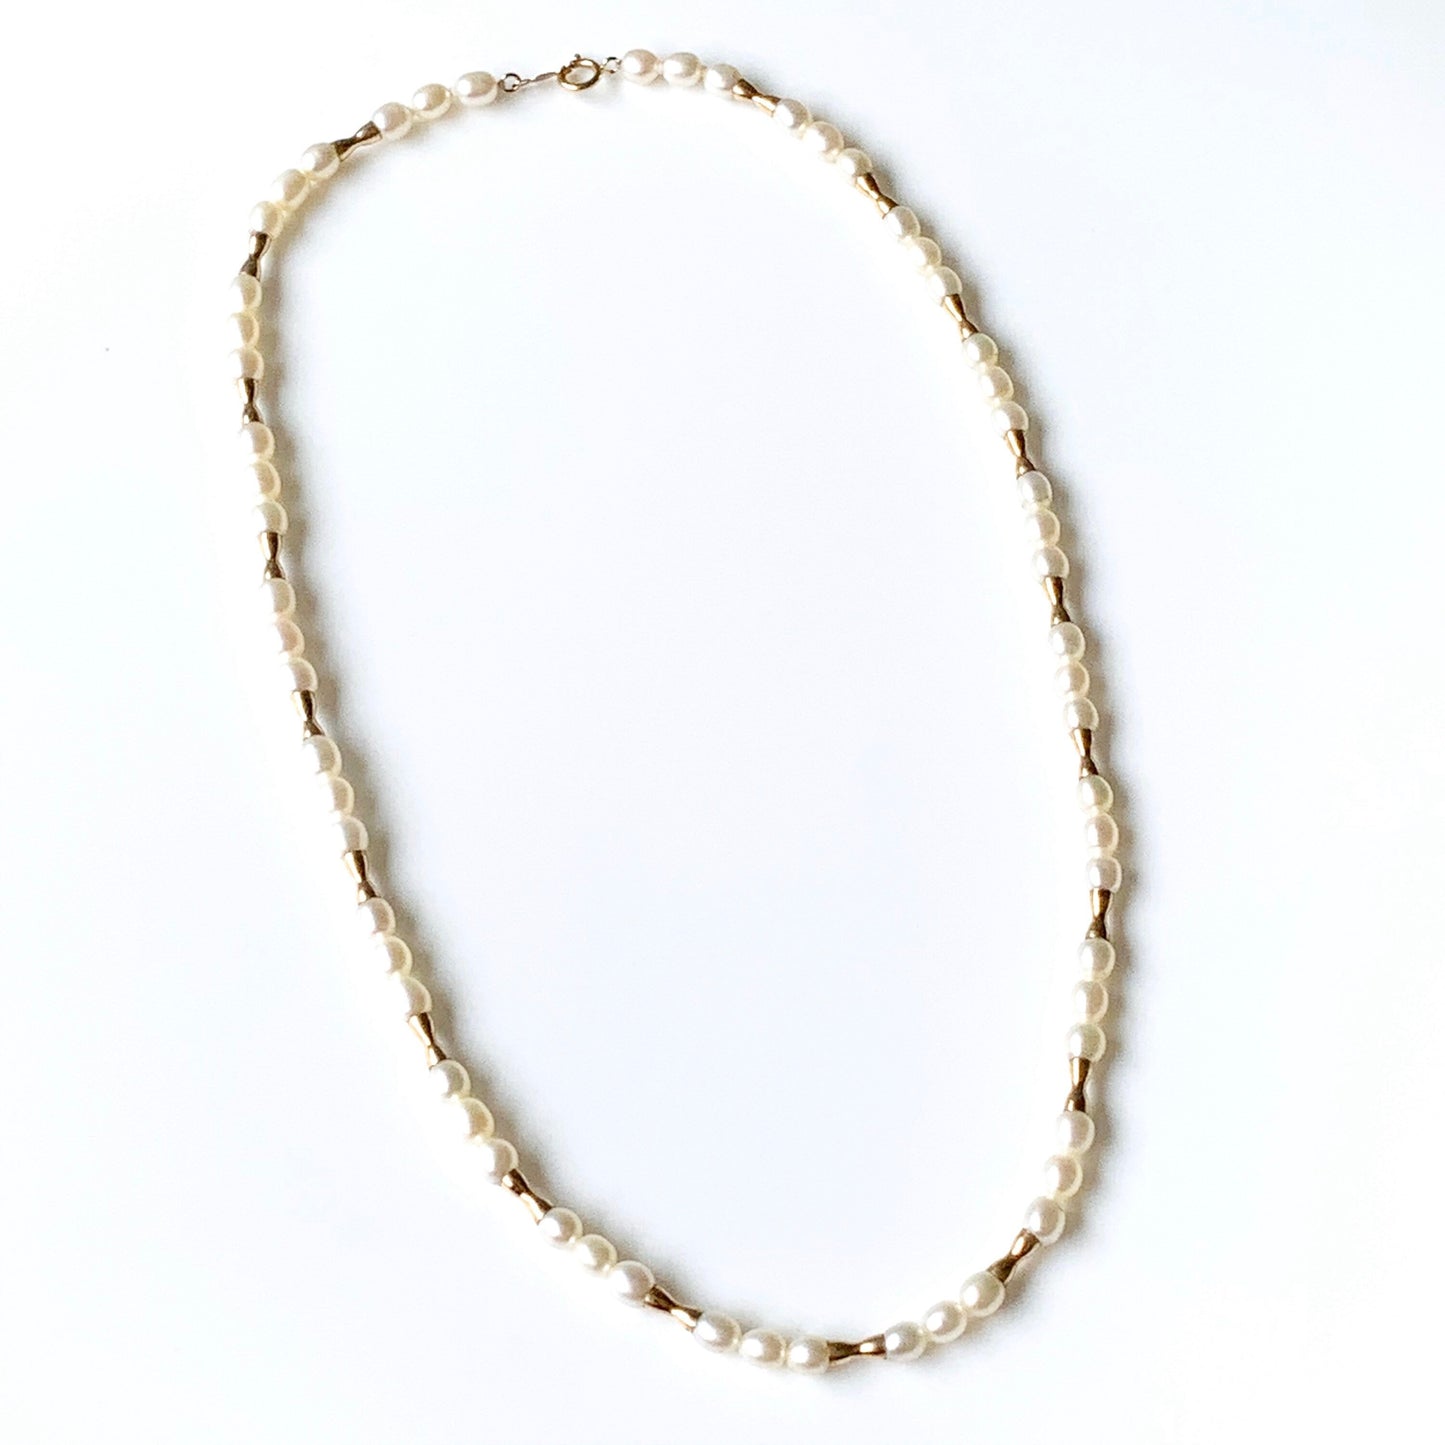 Cultured Pearl and Gold Bead Necklace